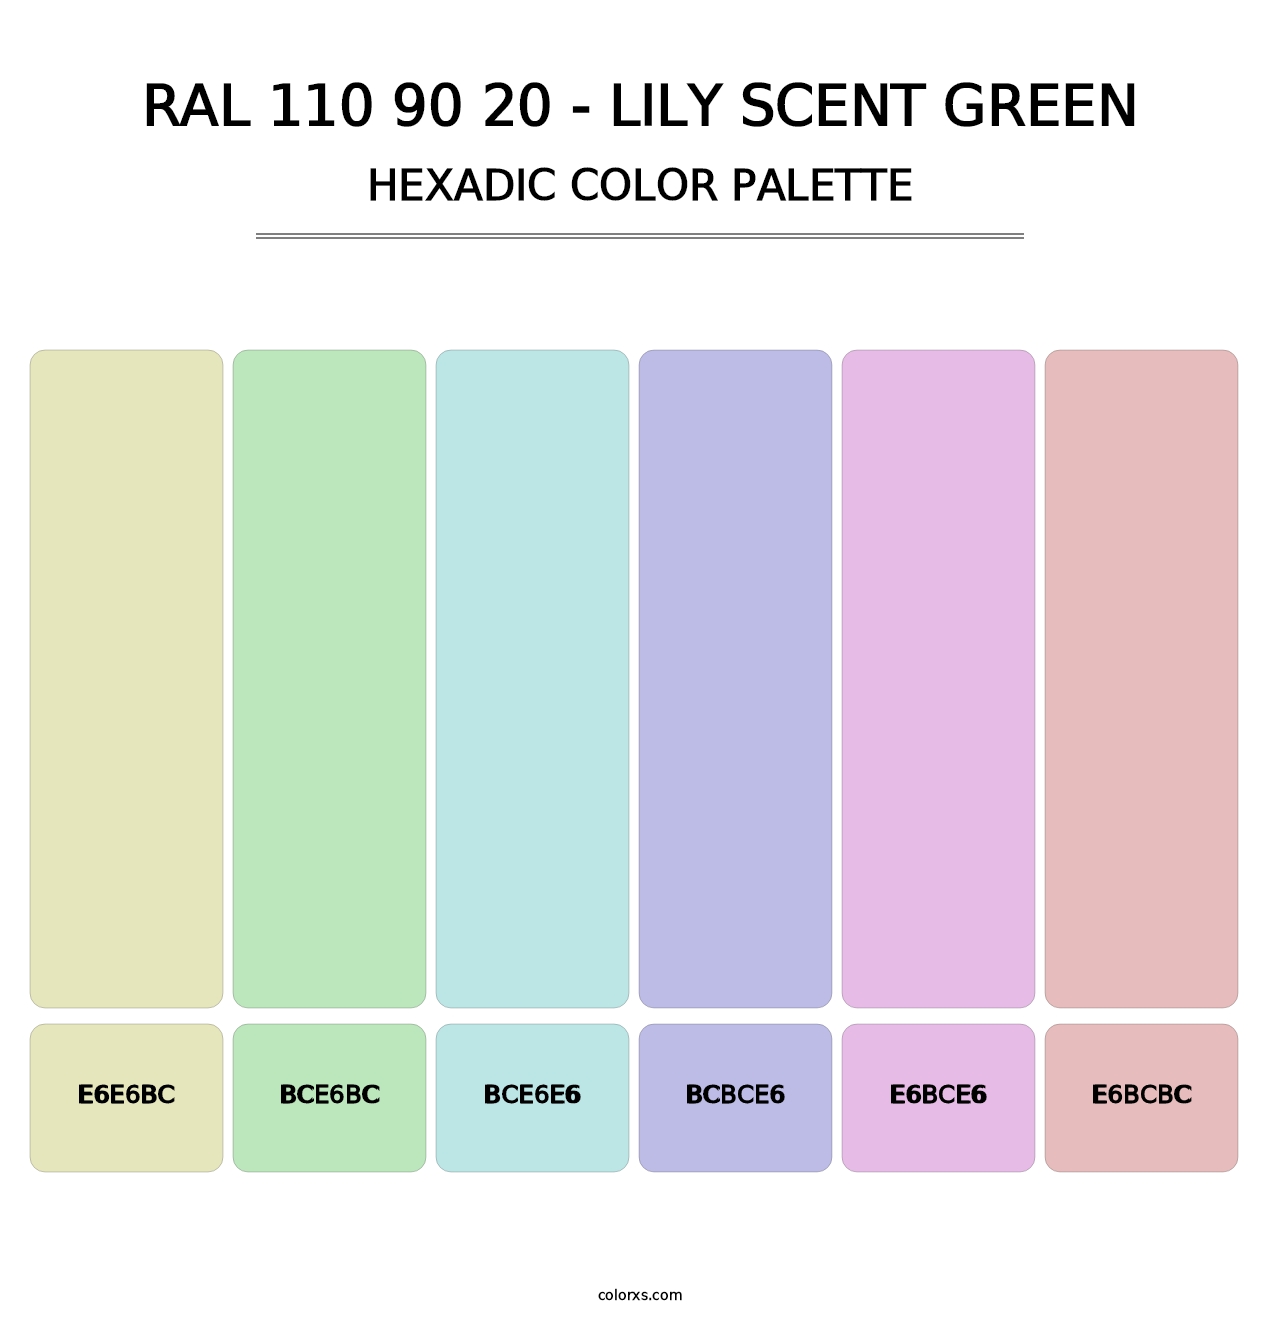 RAL 110 90 20 - Lily Scent Green - Hexadic Color Palette